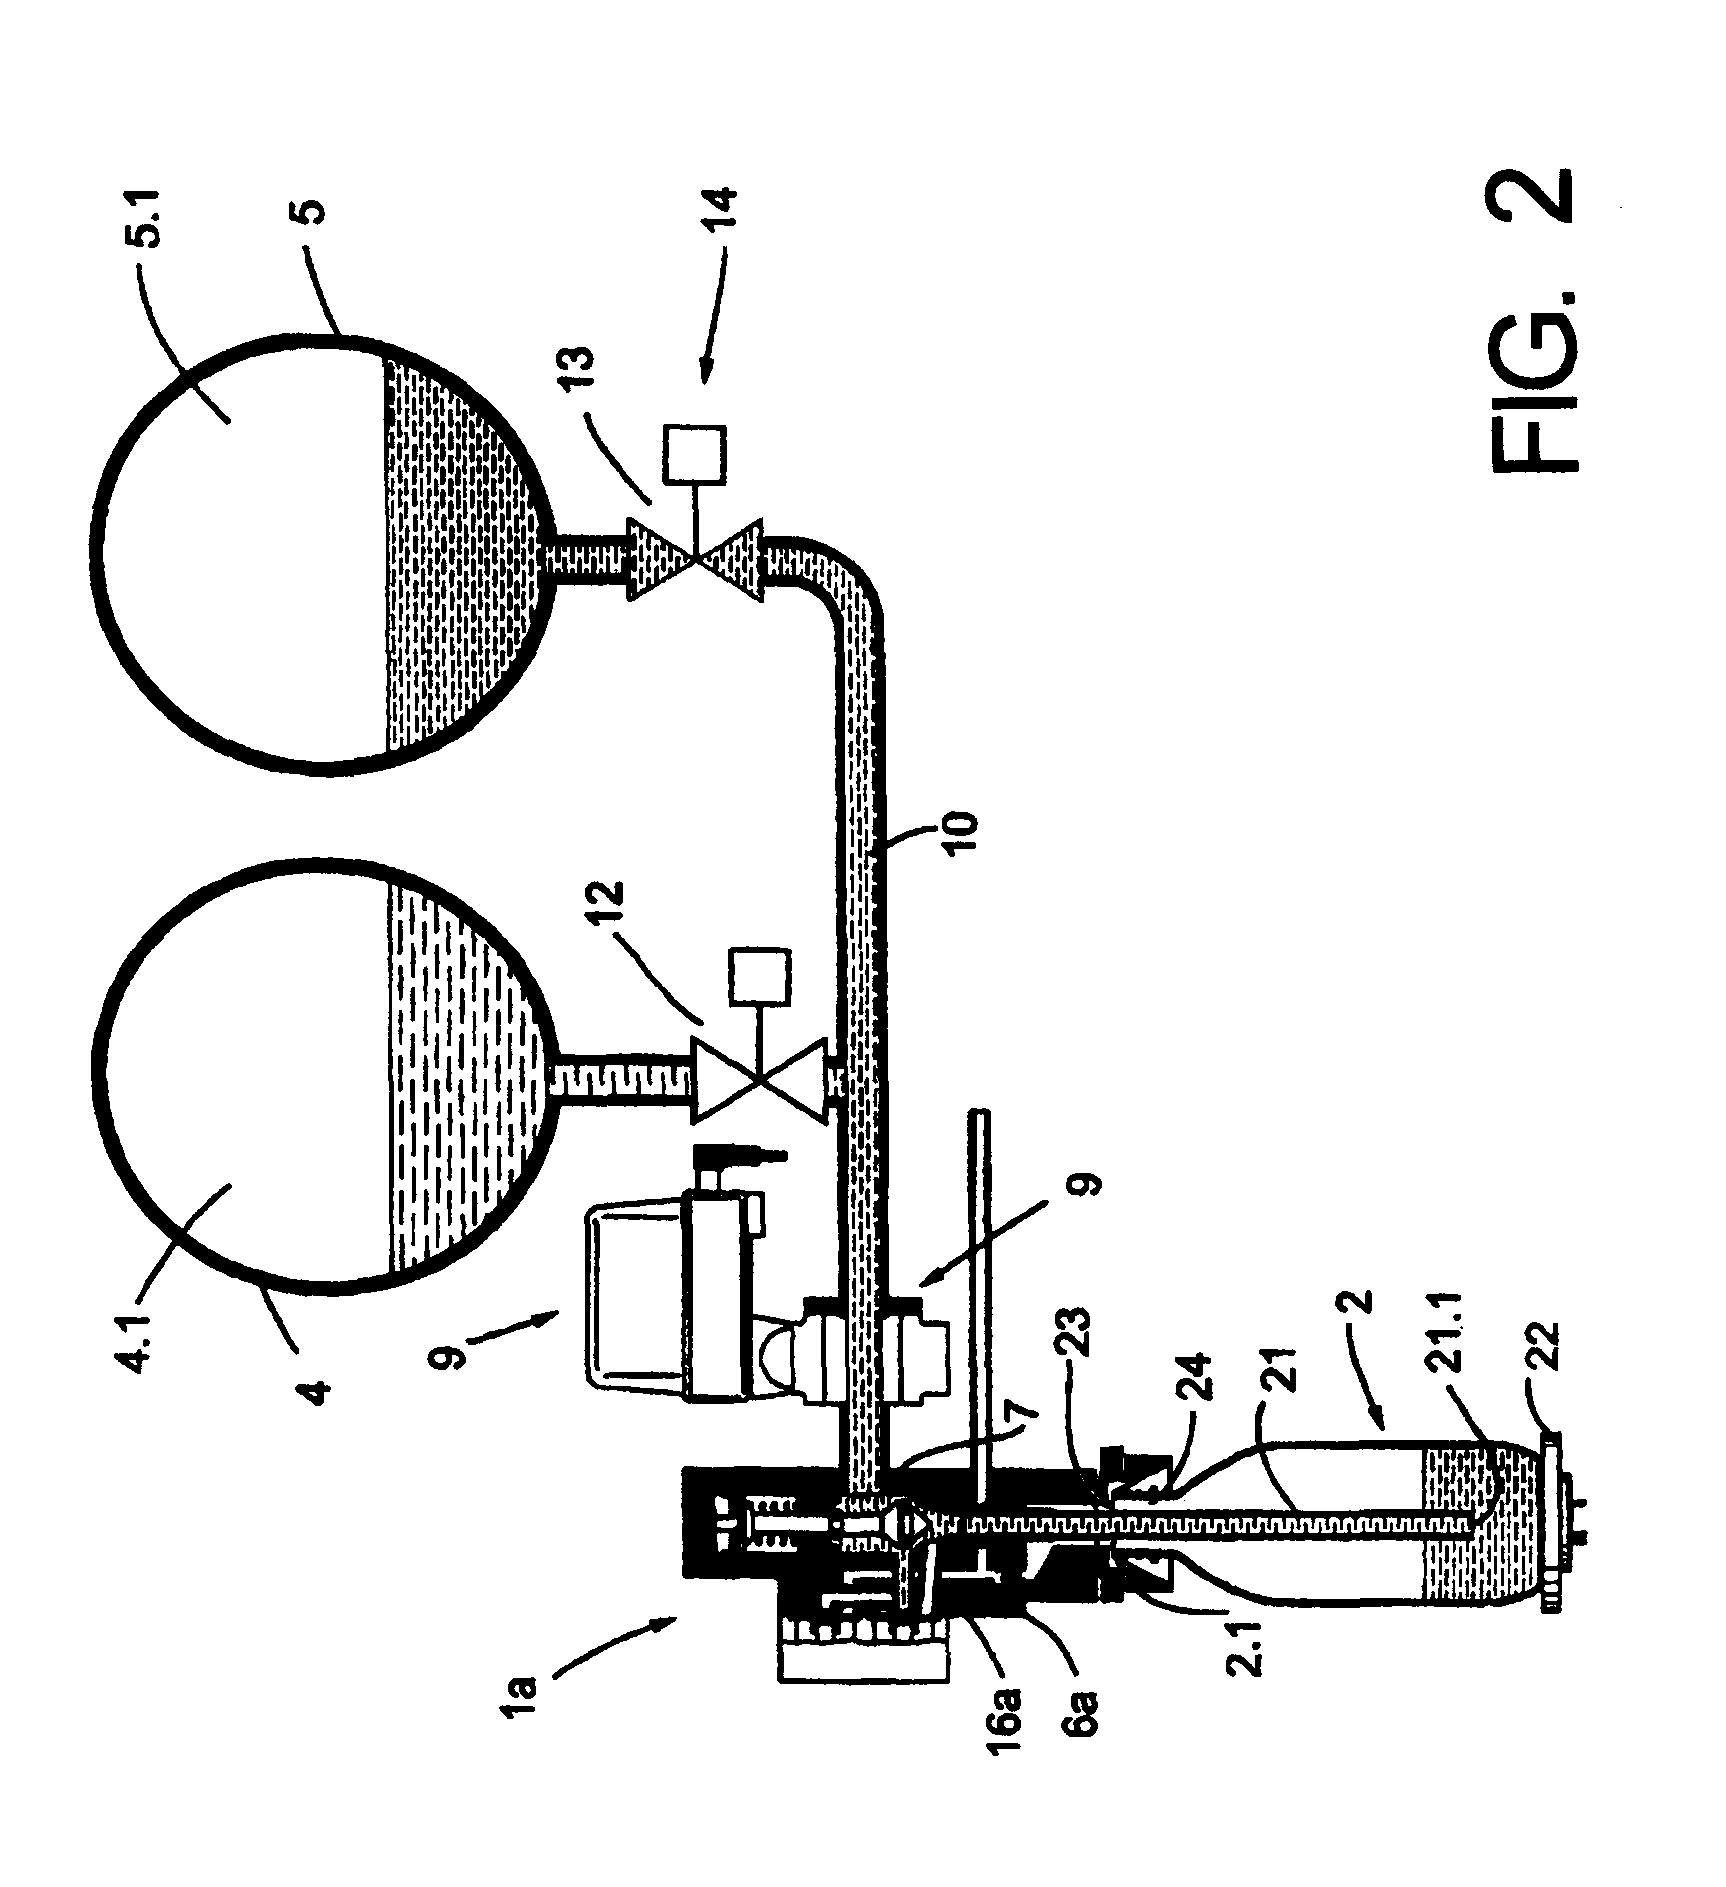 Method and apparatus for filling beverage bottles, in a beverage bottling plant, with a beverage material comprising a carbonated water component and a liquid flavoring component, and method and apparatus for filling containers, in a container filling plant, with a material comprising a first ingredient and a second ingredient